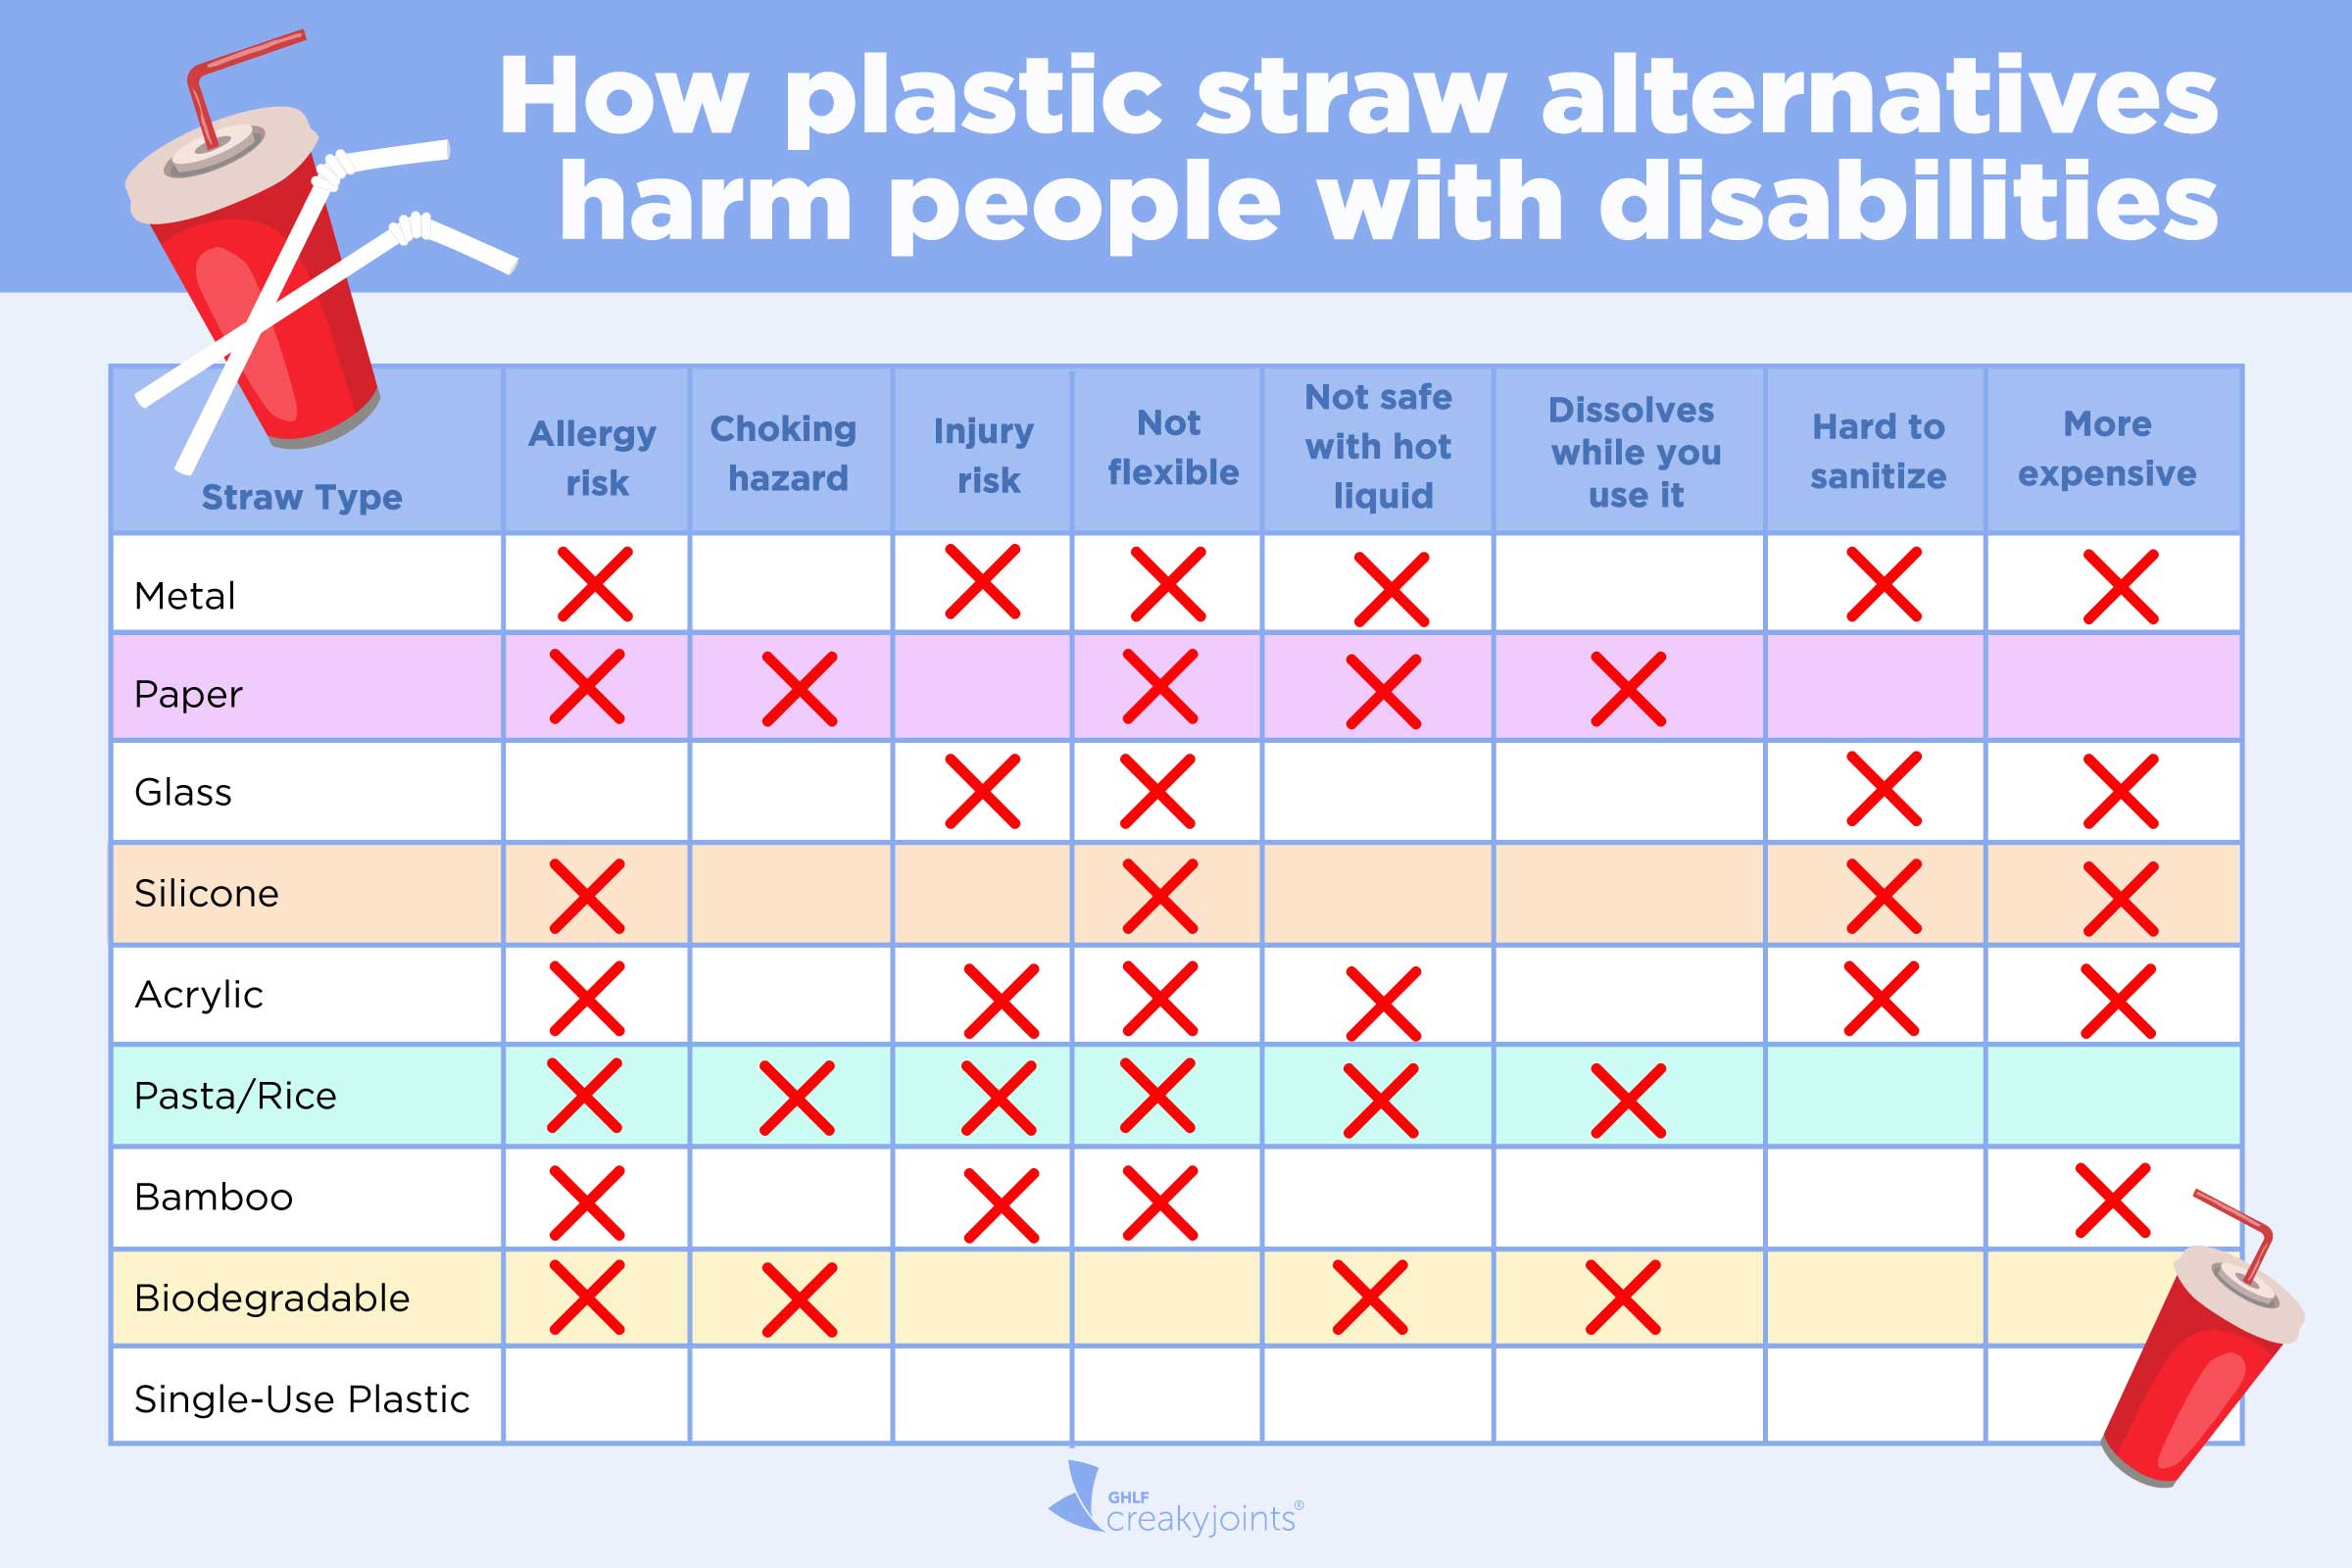 Joint campaign by eight universities to reduce plastic straws